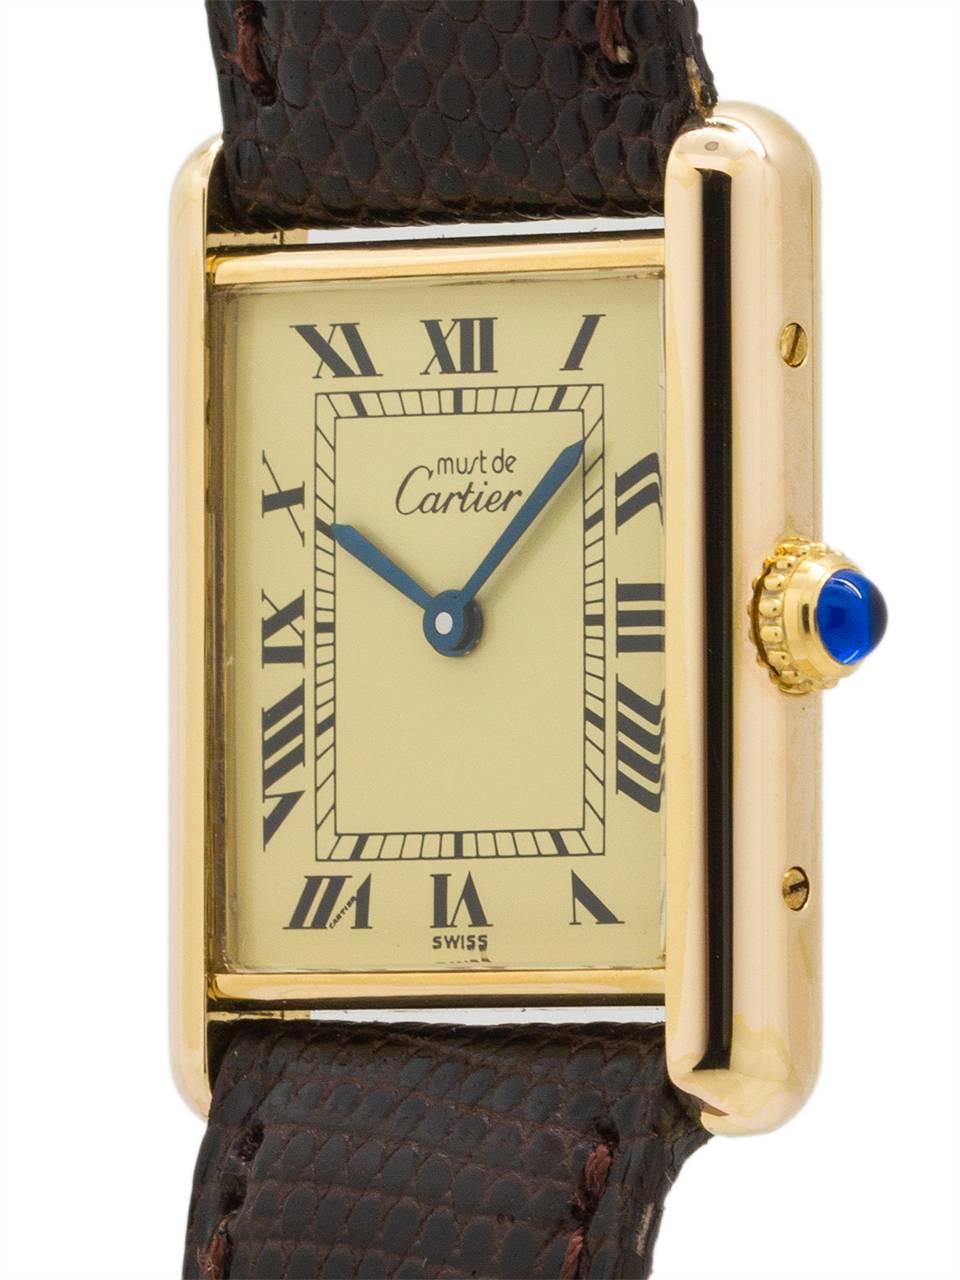 
Cartier Man's Tank Louis circa 1990s. Featuring 24 x 30mm vermeil (20 microns gold over silver) case secured by 4 case back screws. Featuring classic cream color dial signed Must de Cartier with printed black Roman numerals and blued steel hands.